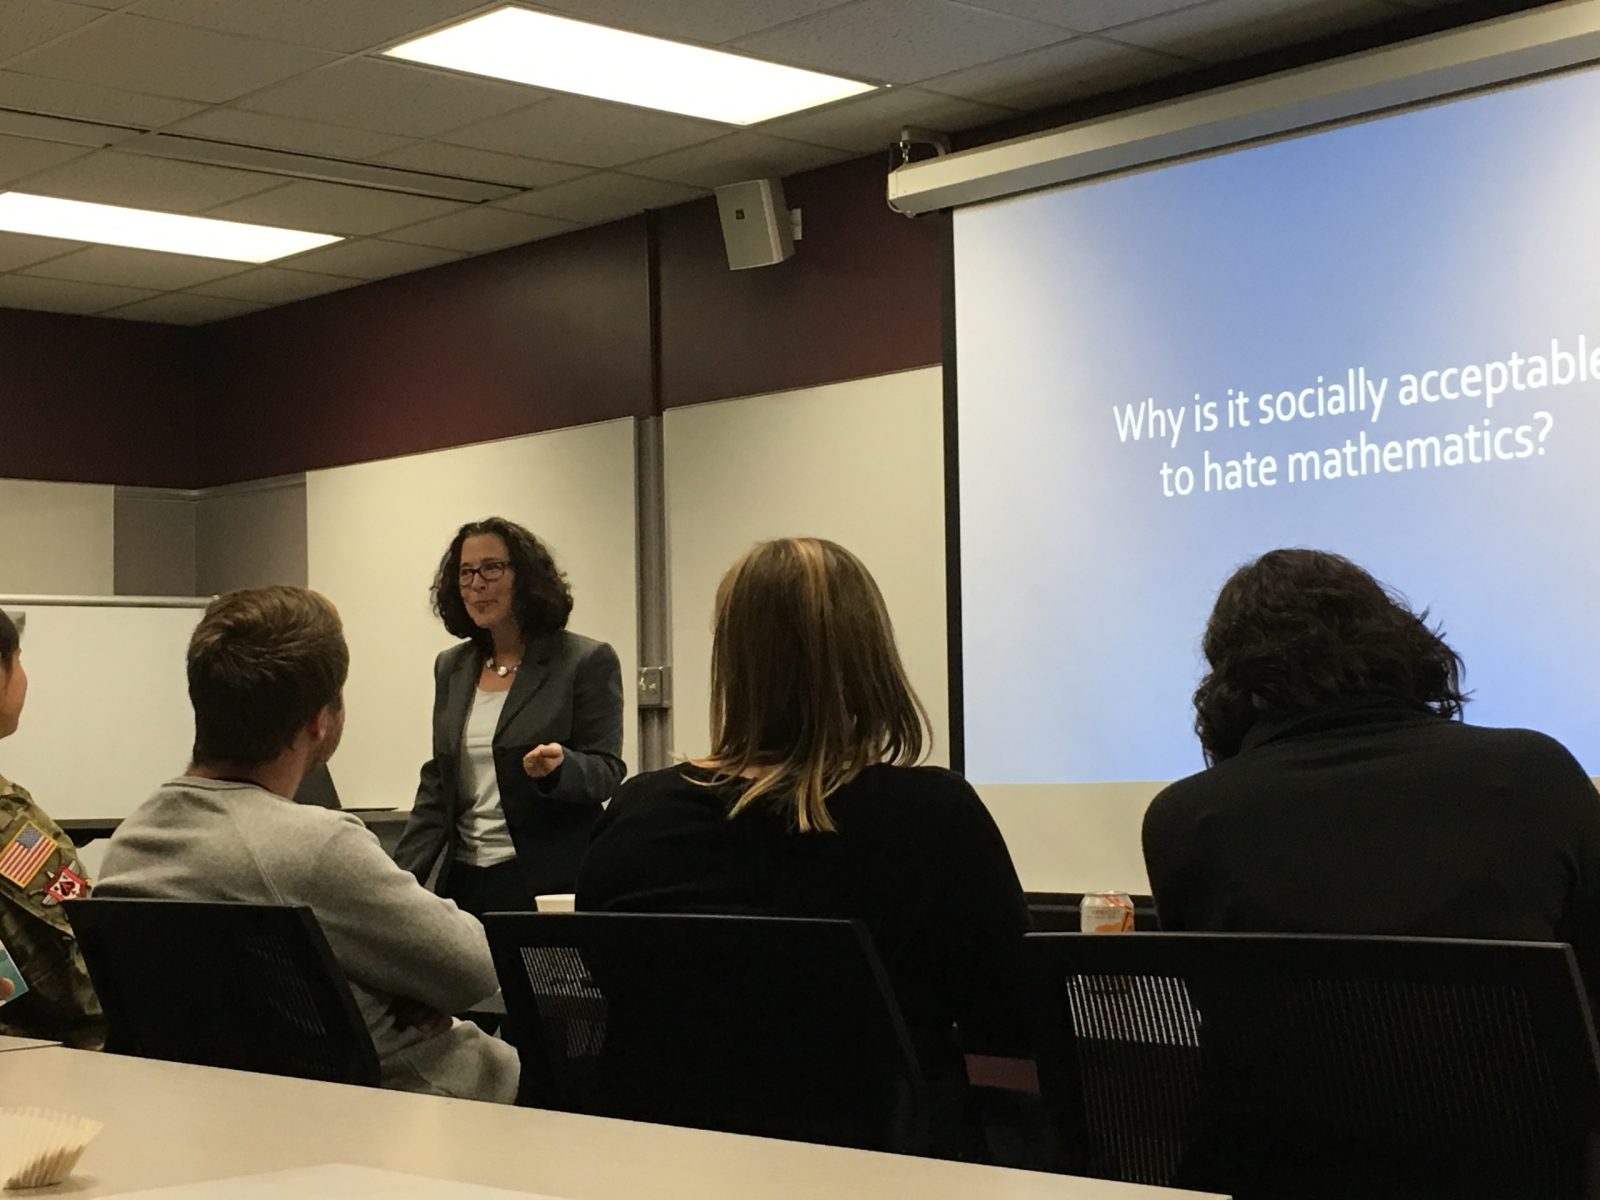 More photos from Dr. Levys' talk on October 22nd